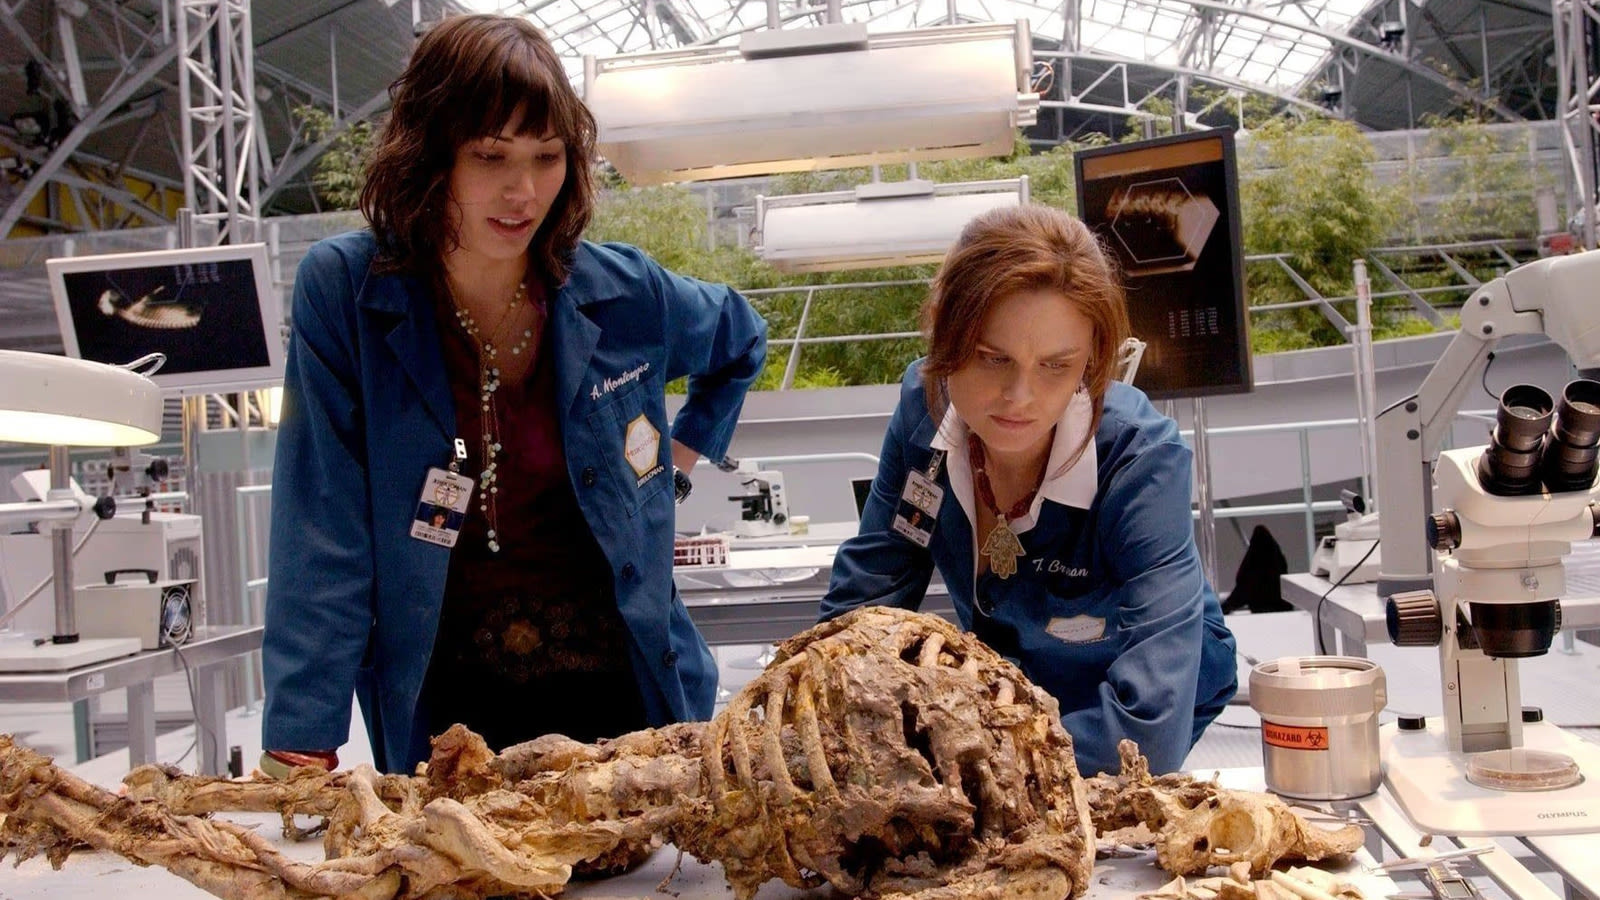 One Scene In Bones' Pilot Completely Changed The Course Of The Show - SlashFilm